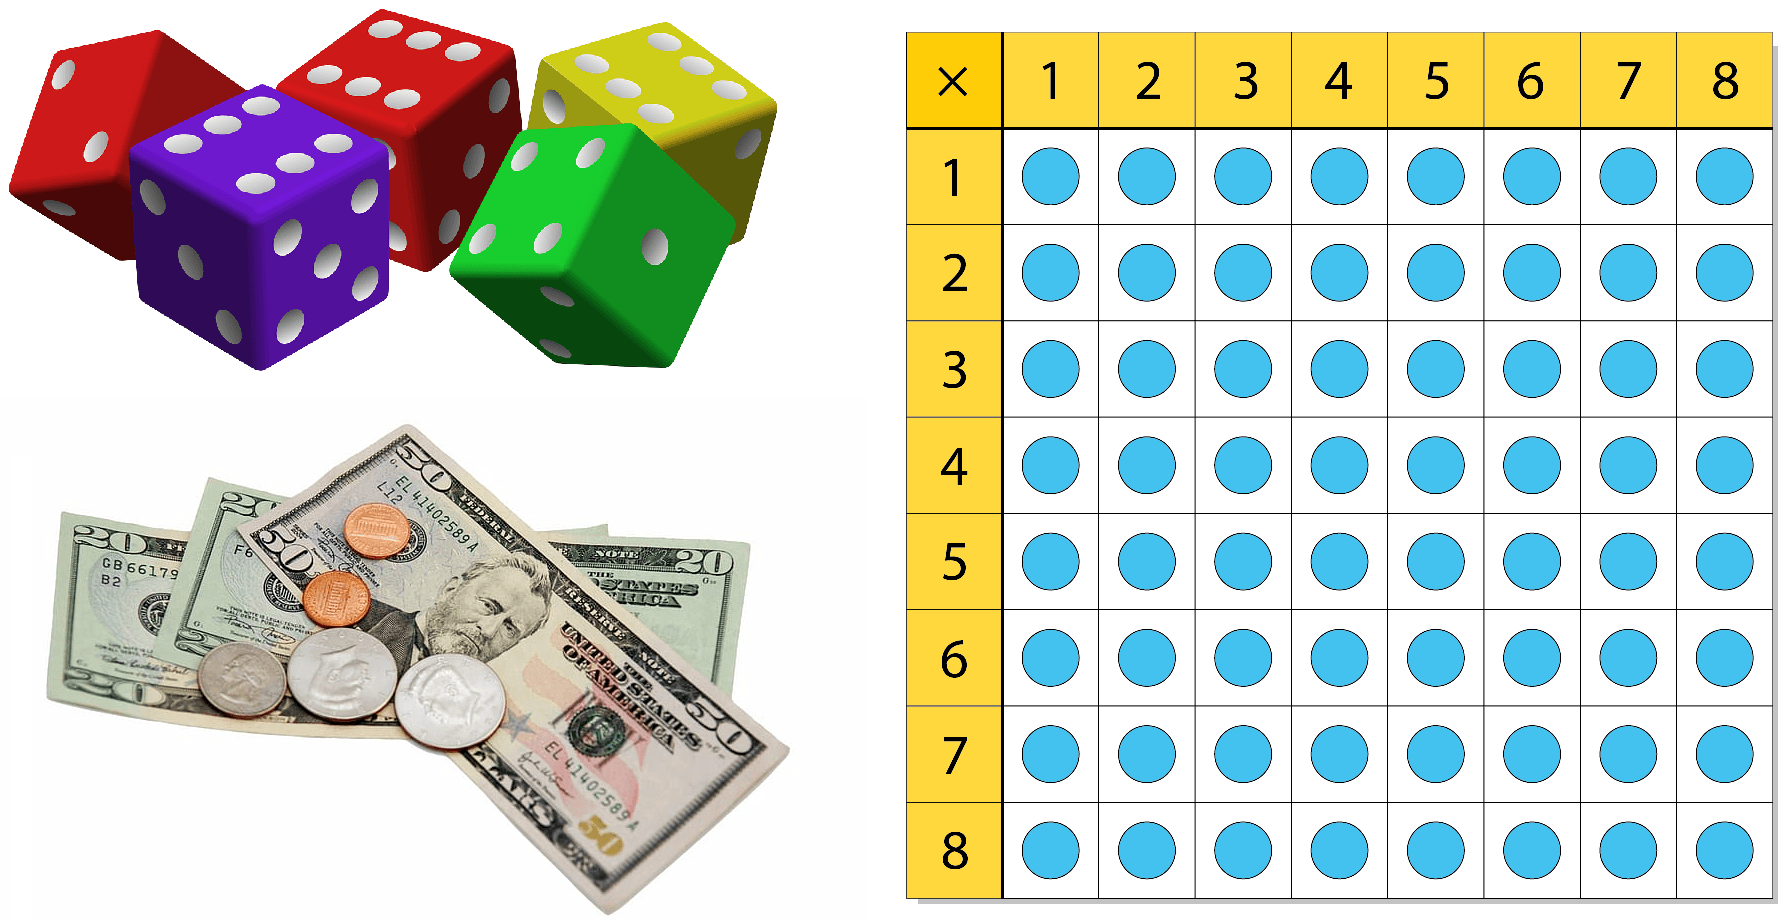 Five multicolored dice, a stack of US currency, and a dot array table